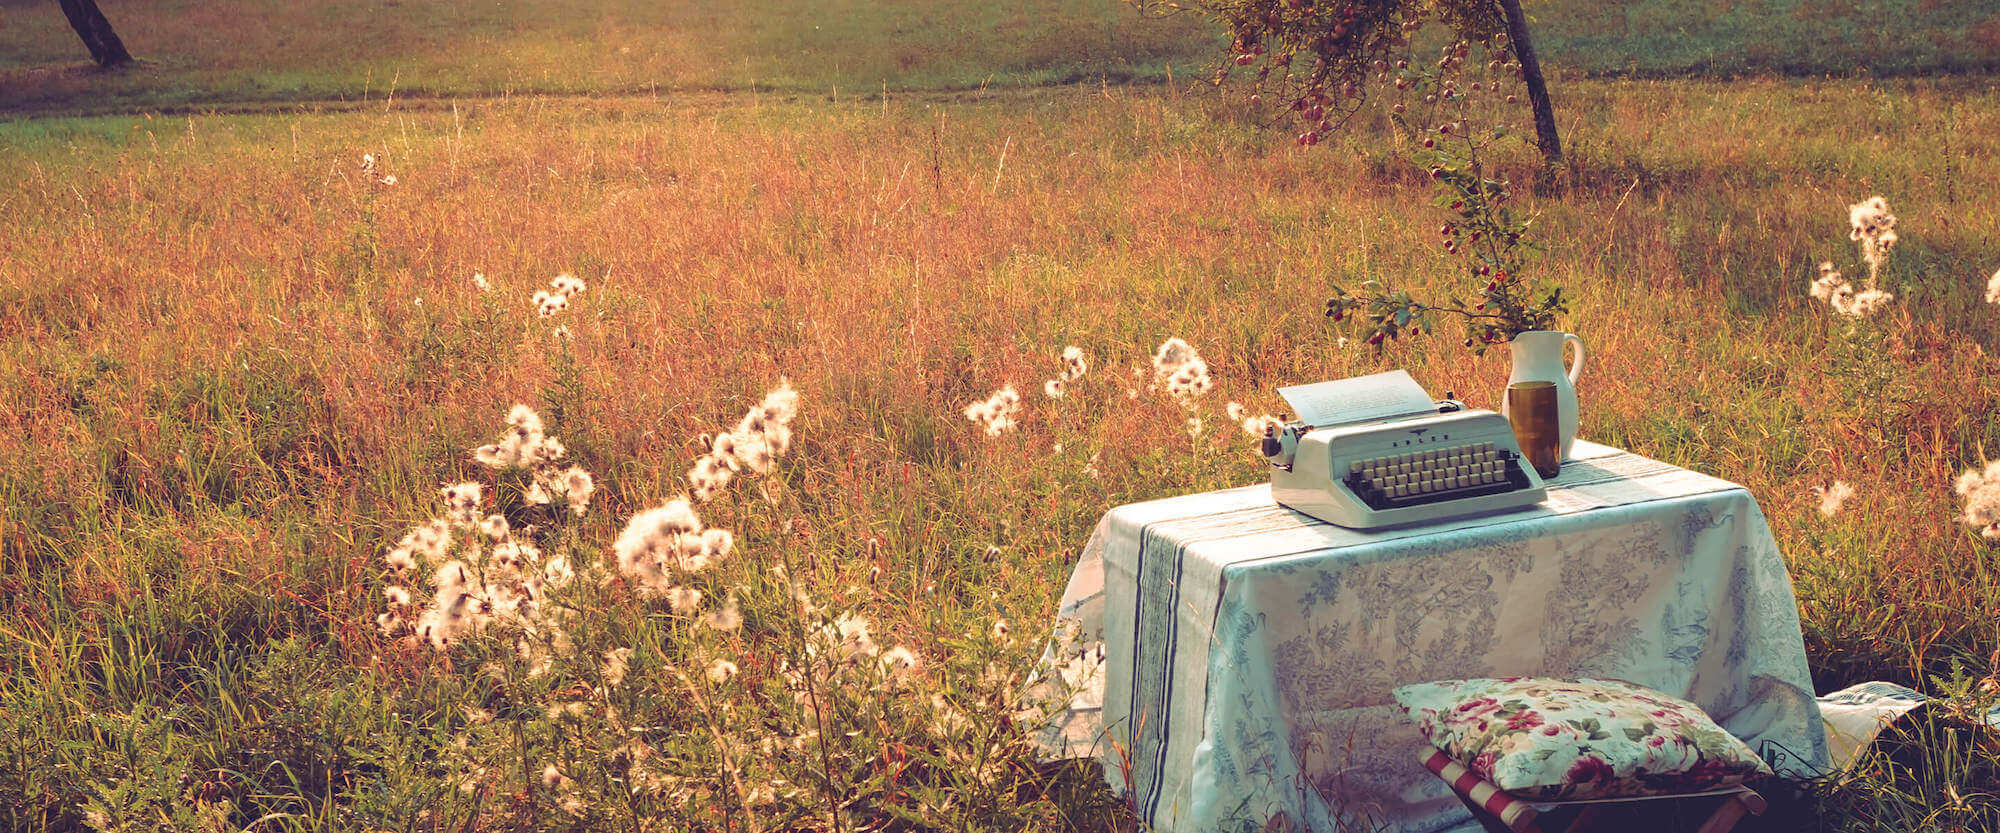 For Food & Love – A typewriter in a field at sunset